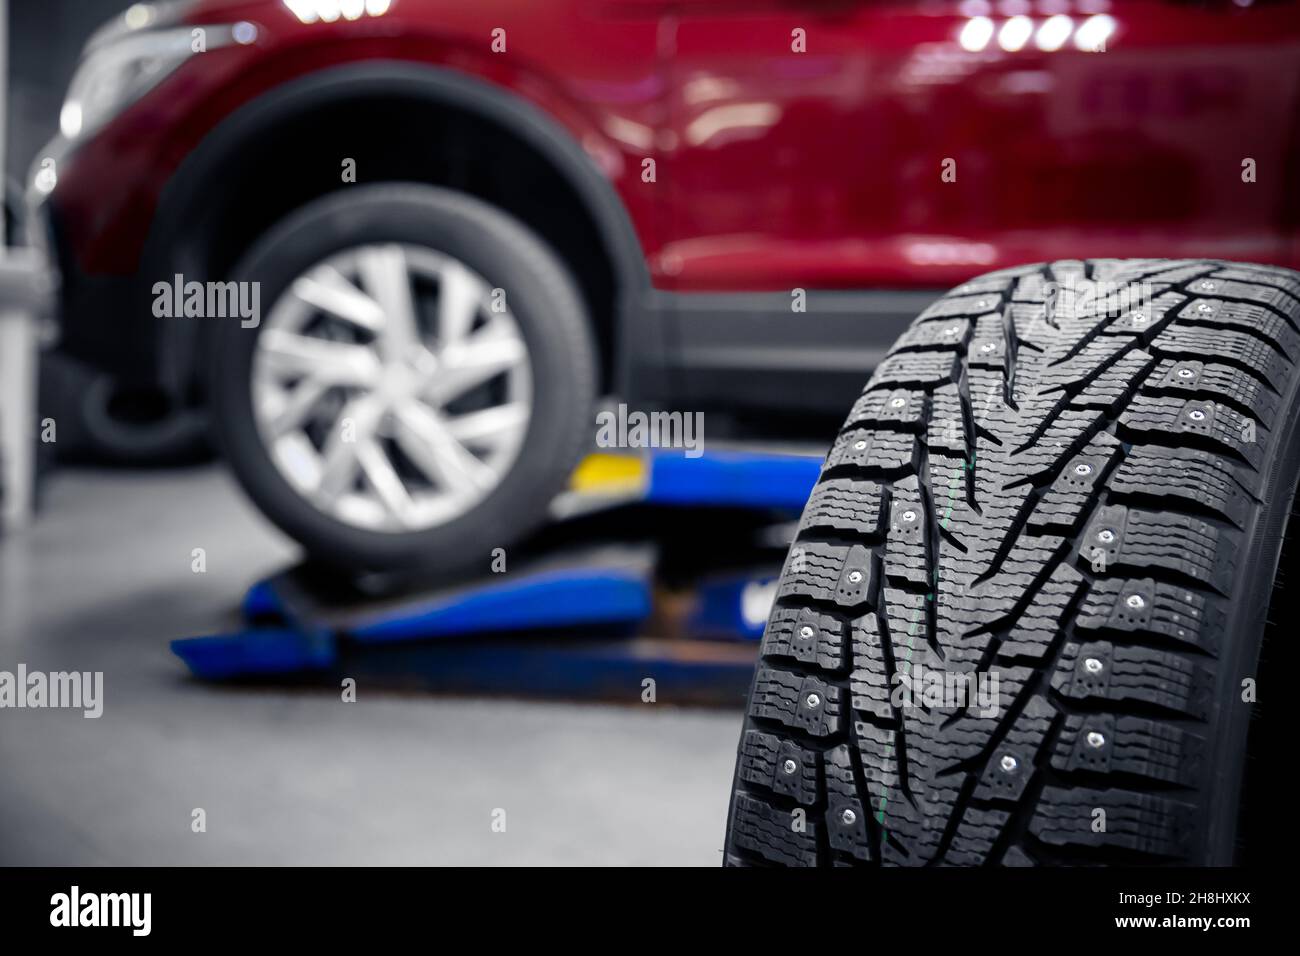 Selective focus winter tire with steel studs in service, in background car is lifted on lift. Stock Photo